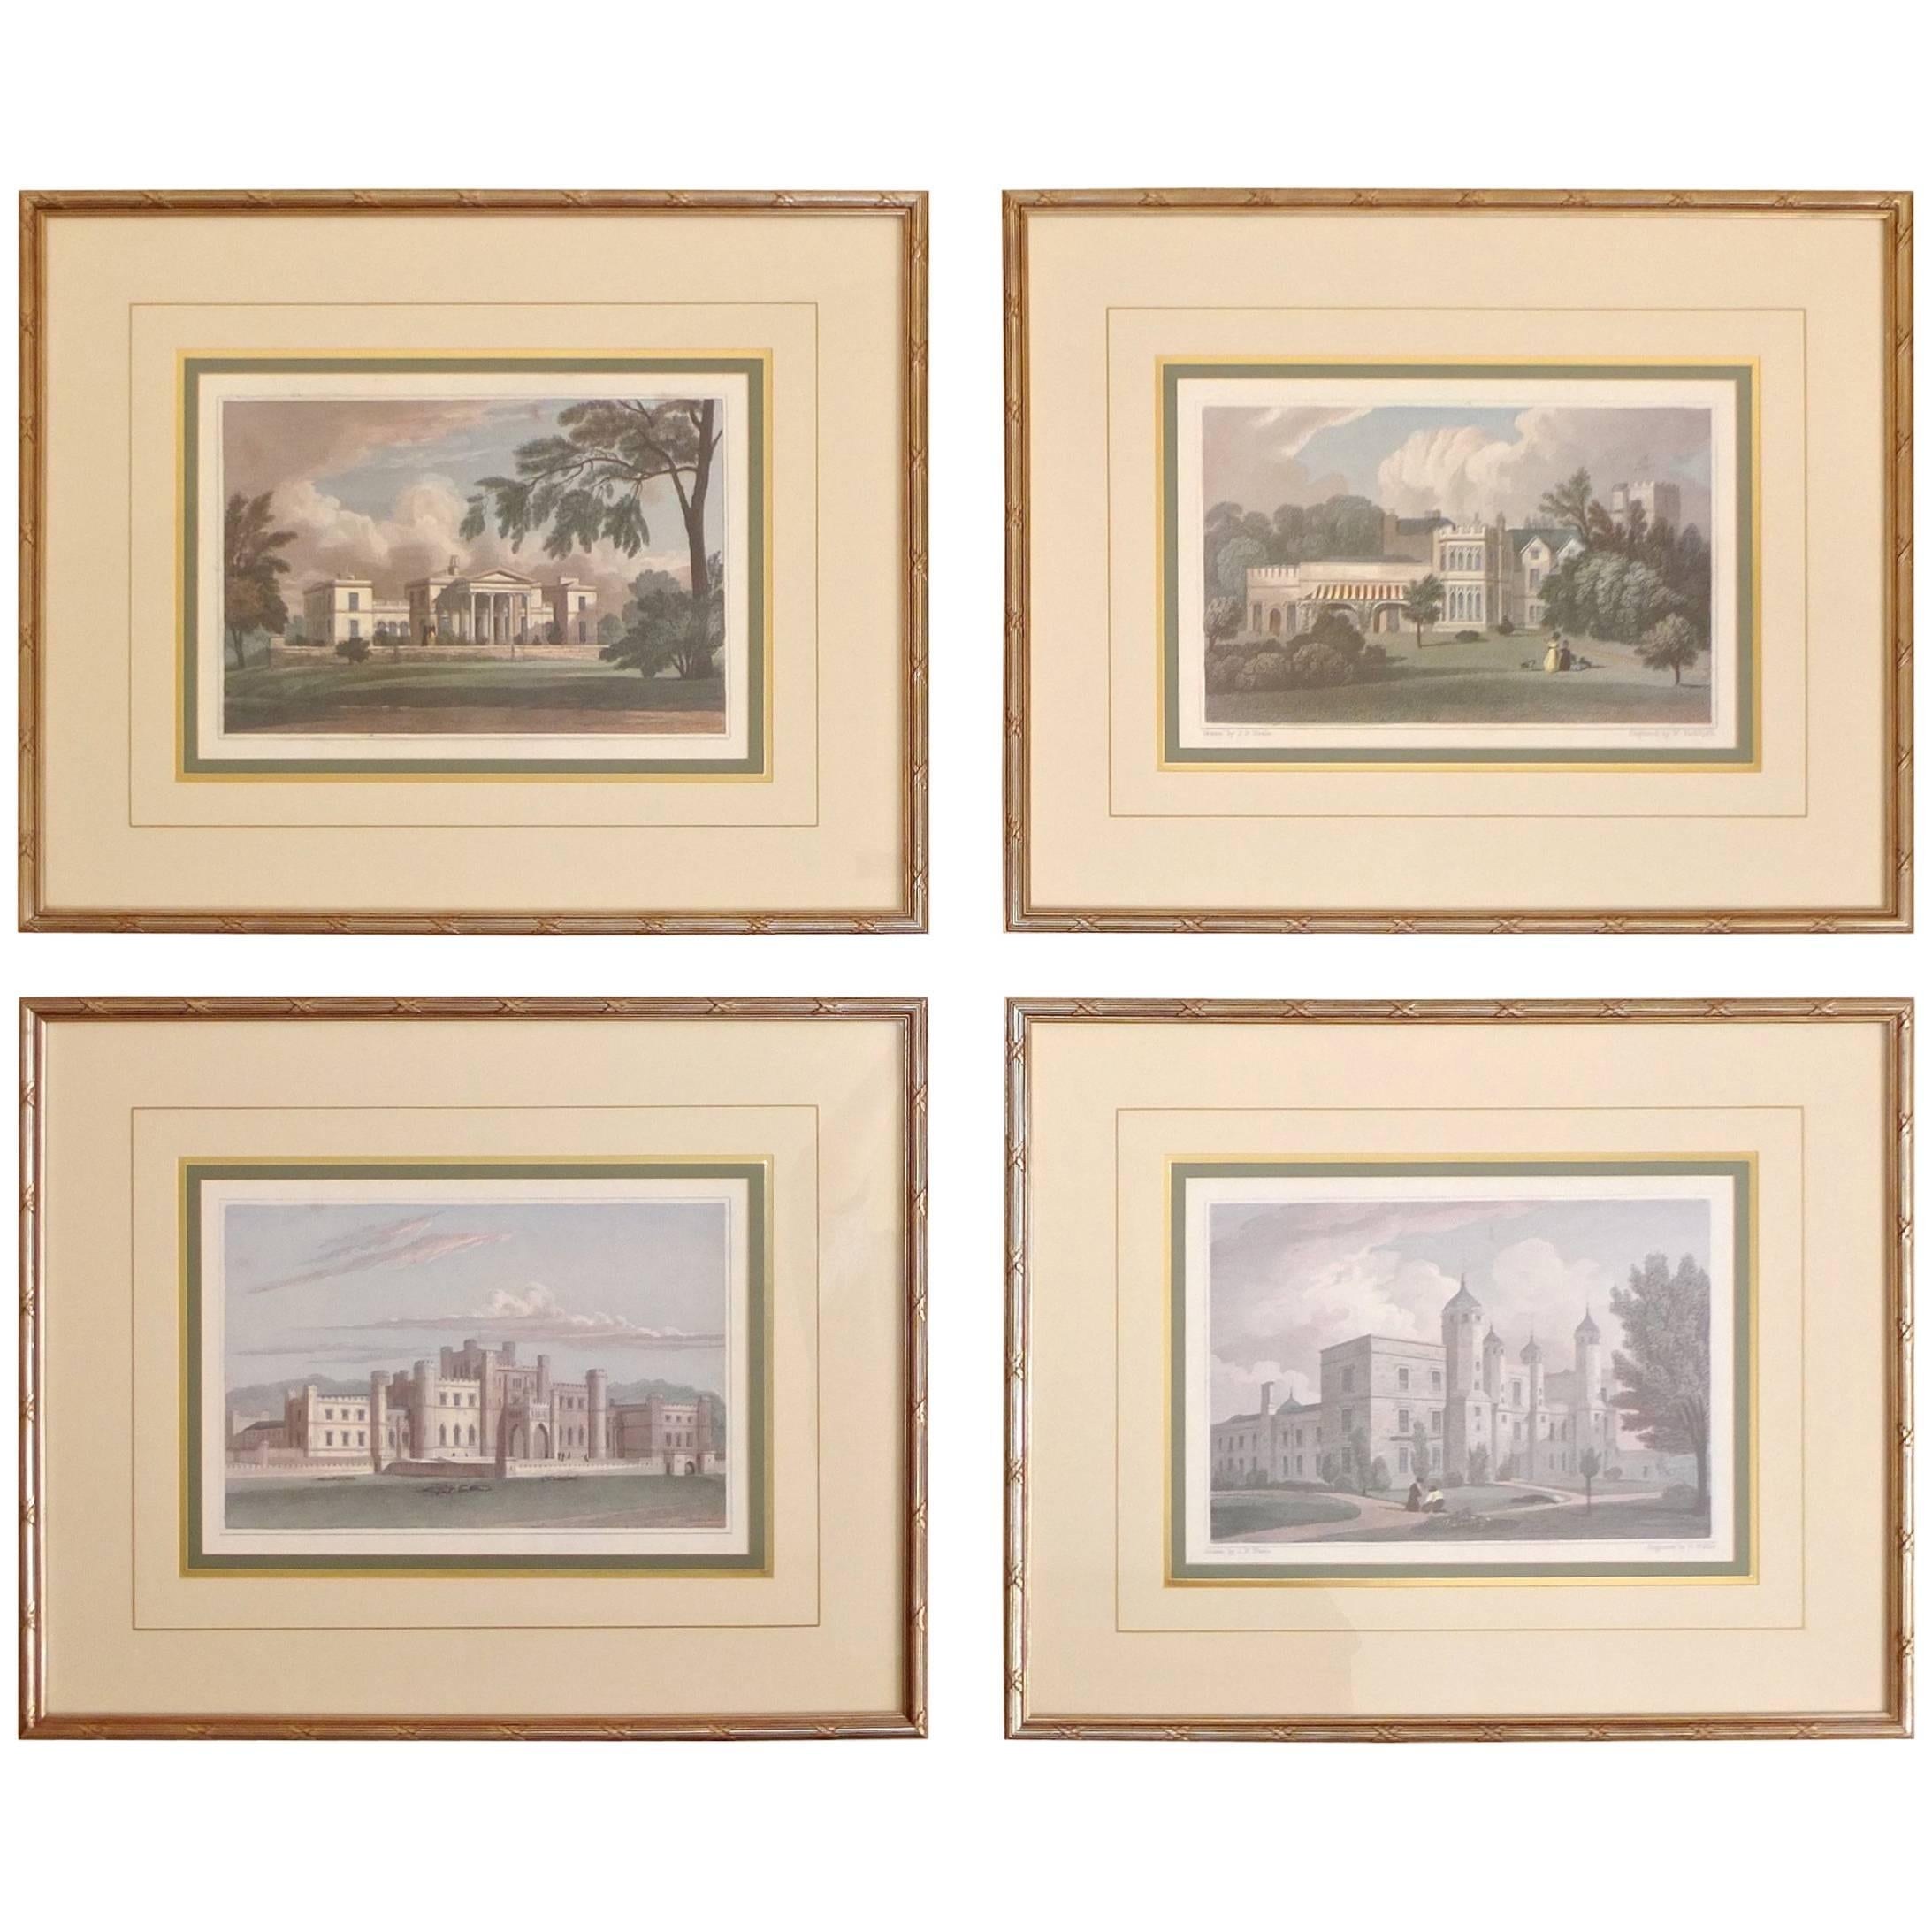 Four Engravings of English Stately Homes by J. P. Neale